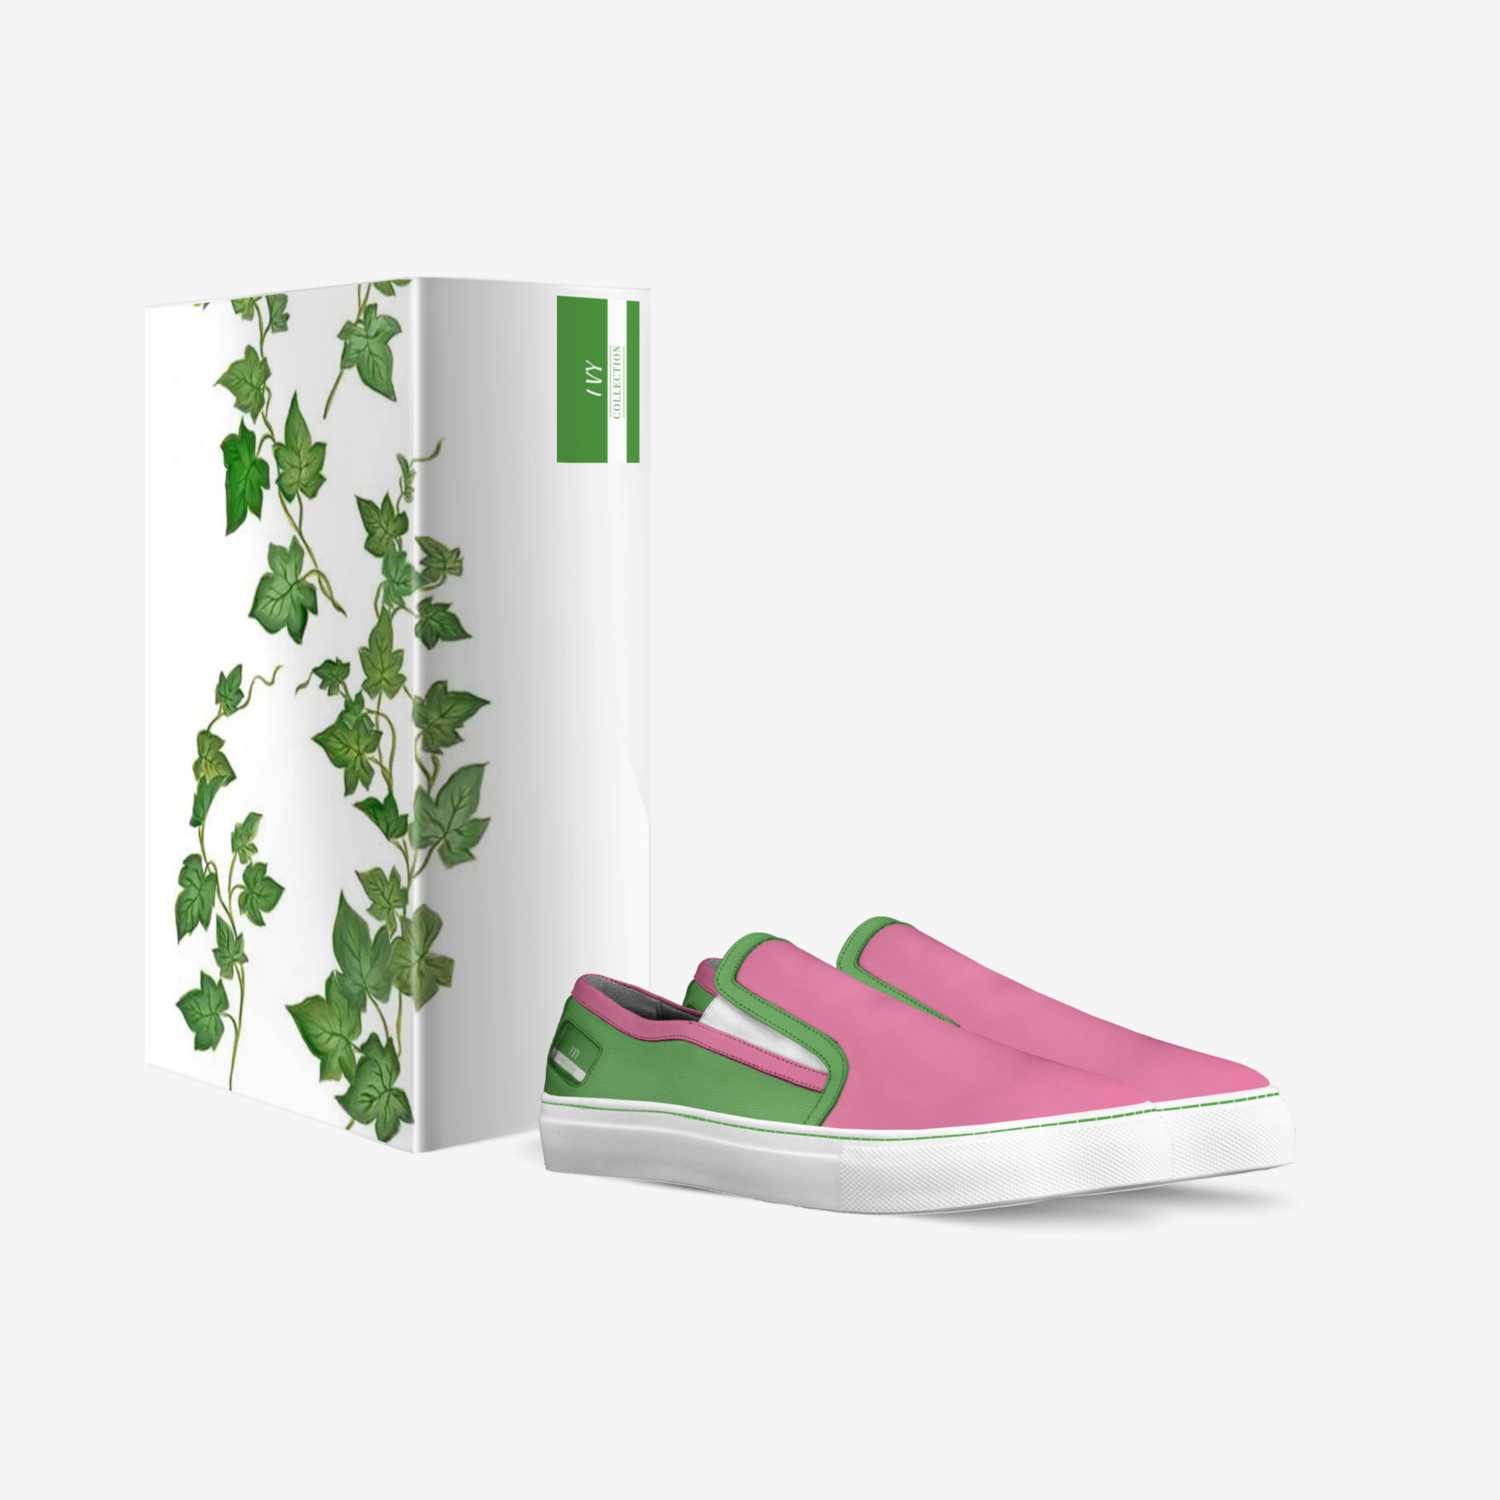 ALPHA KAPPA ALPHA custom made in Italy shoes by K Parker | Box view